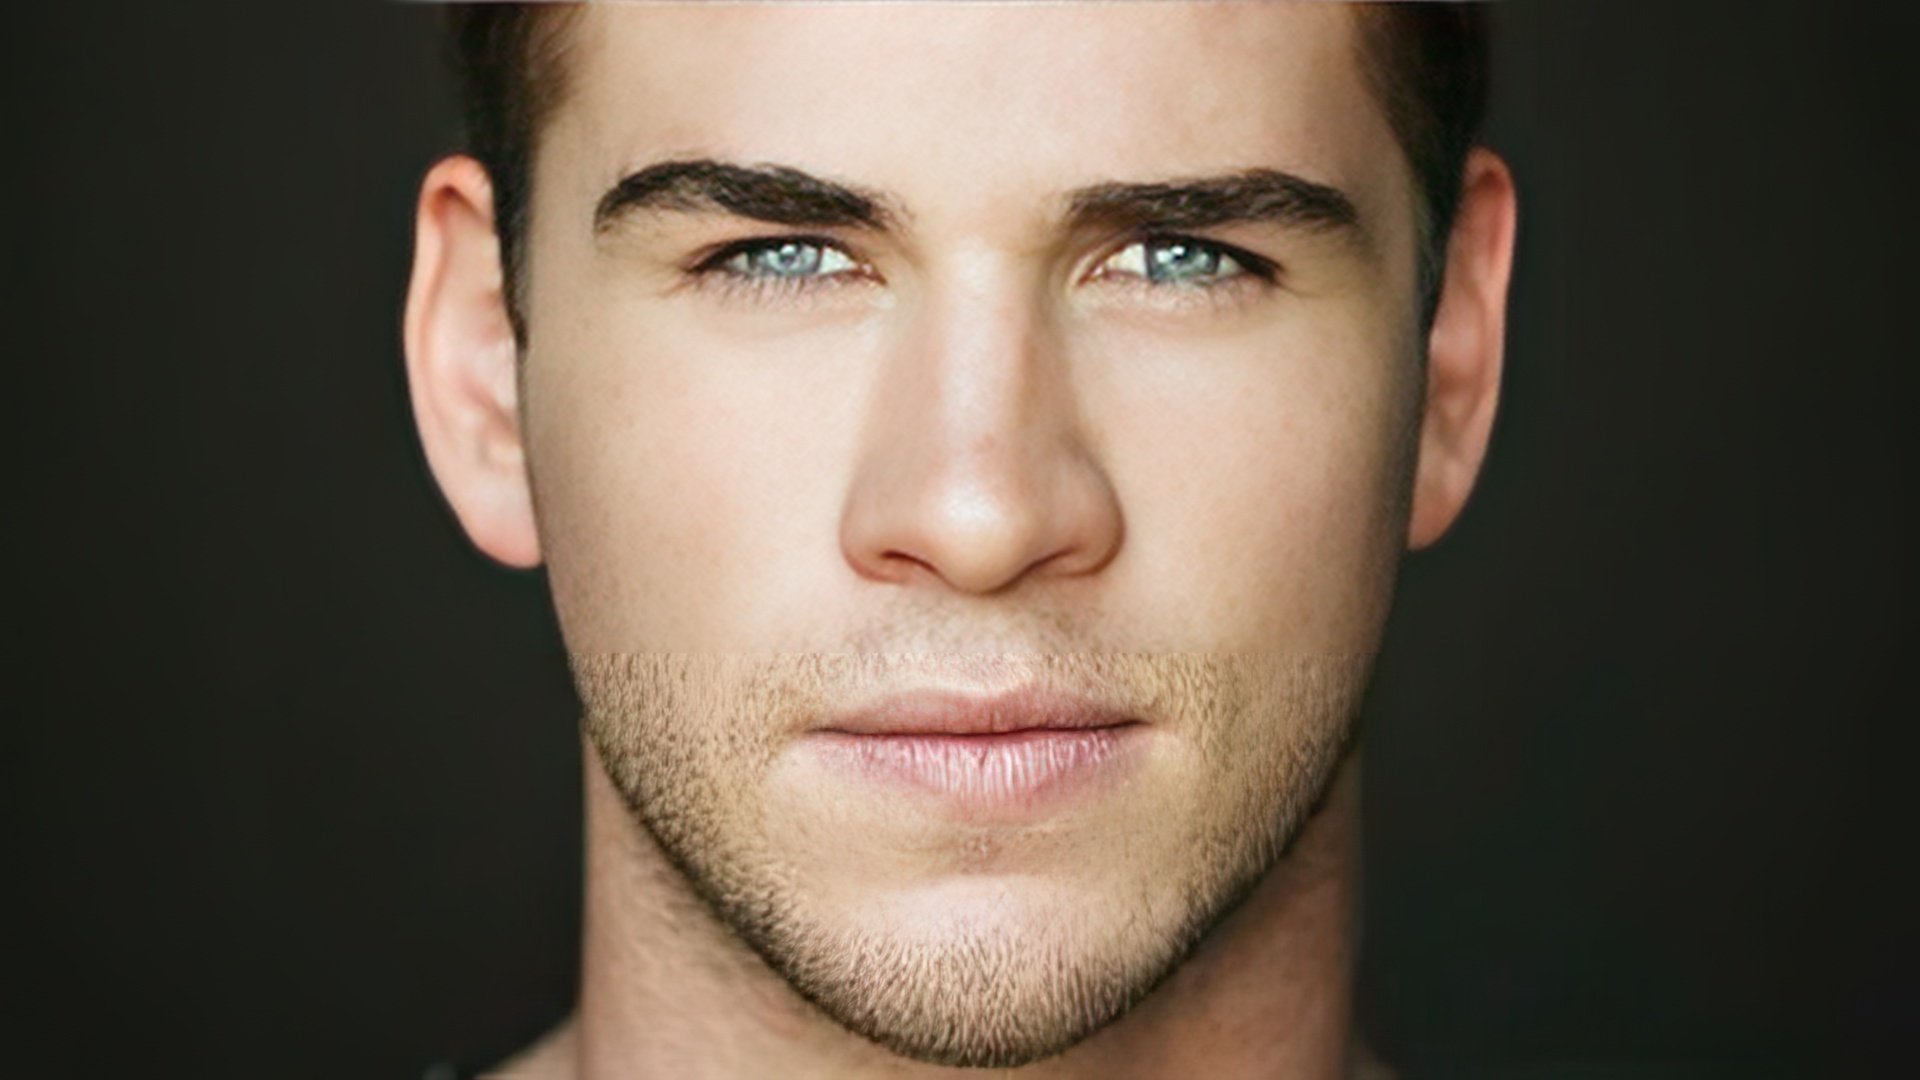 Liam Hemsworth, I’d like to be a good example for kids